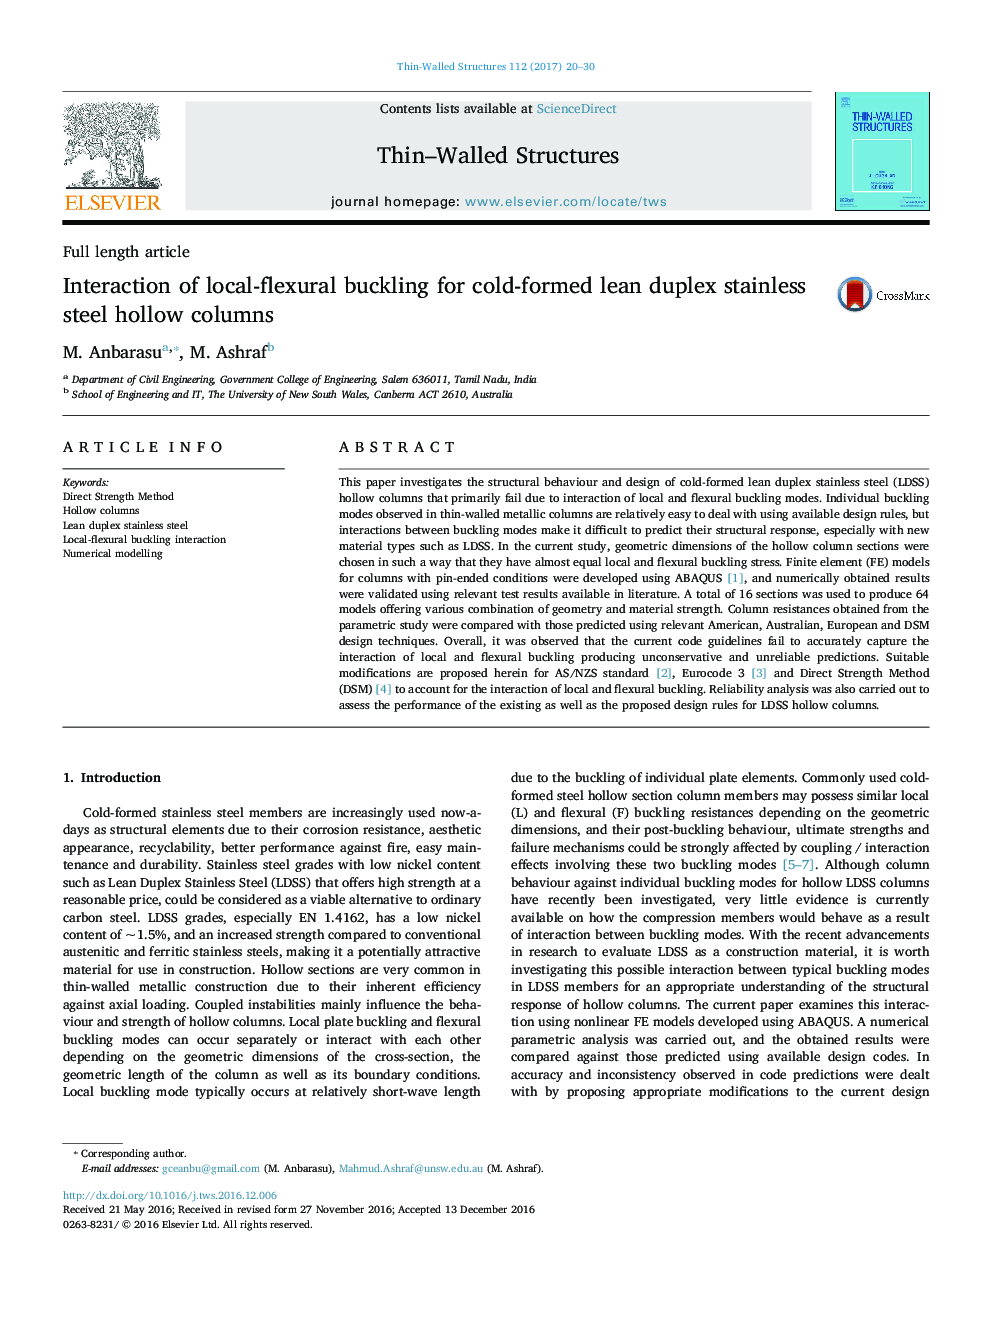 Interaction of local-flexural buckling for cold-formed lean duplex stainless steel hollow columns